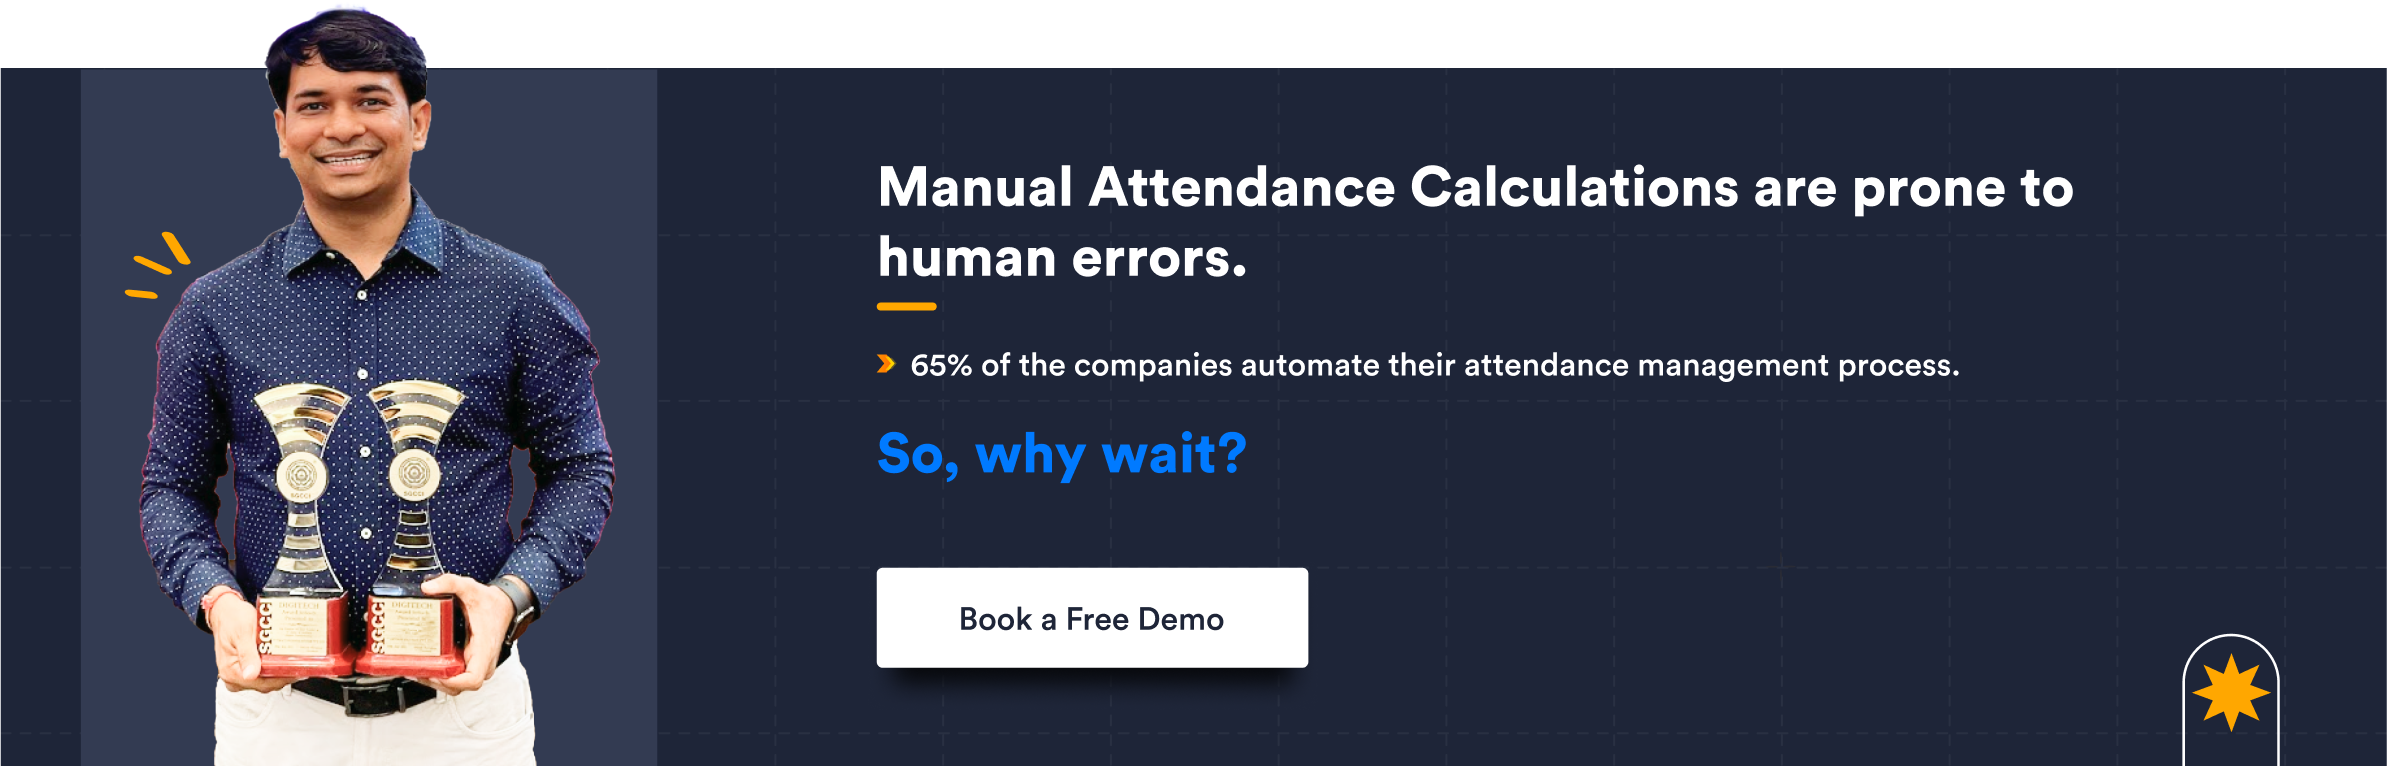 Manual Attendance Calculations are prone to human errors.